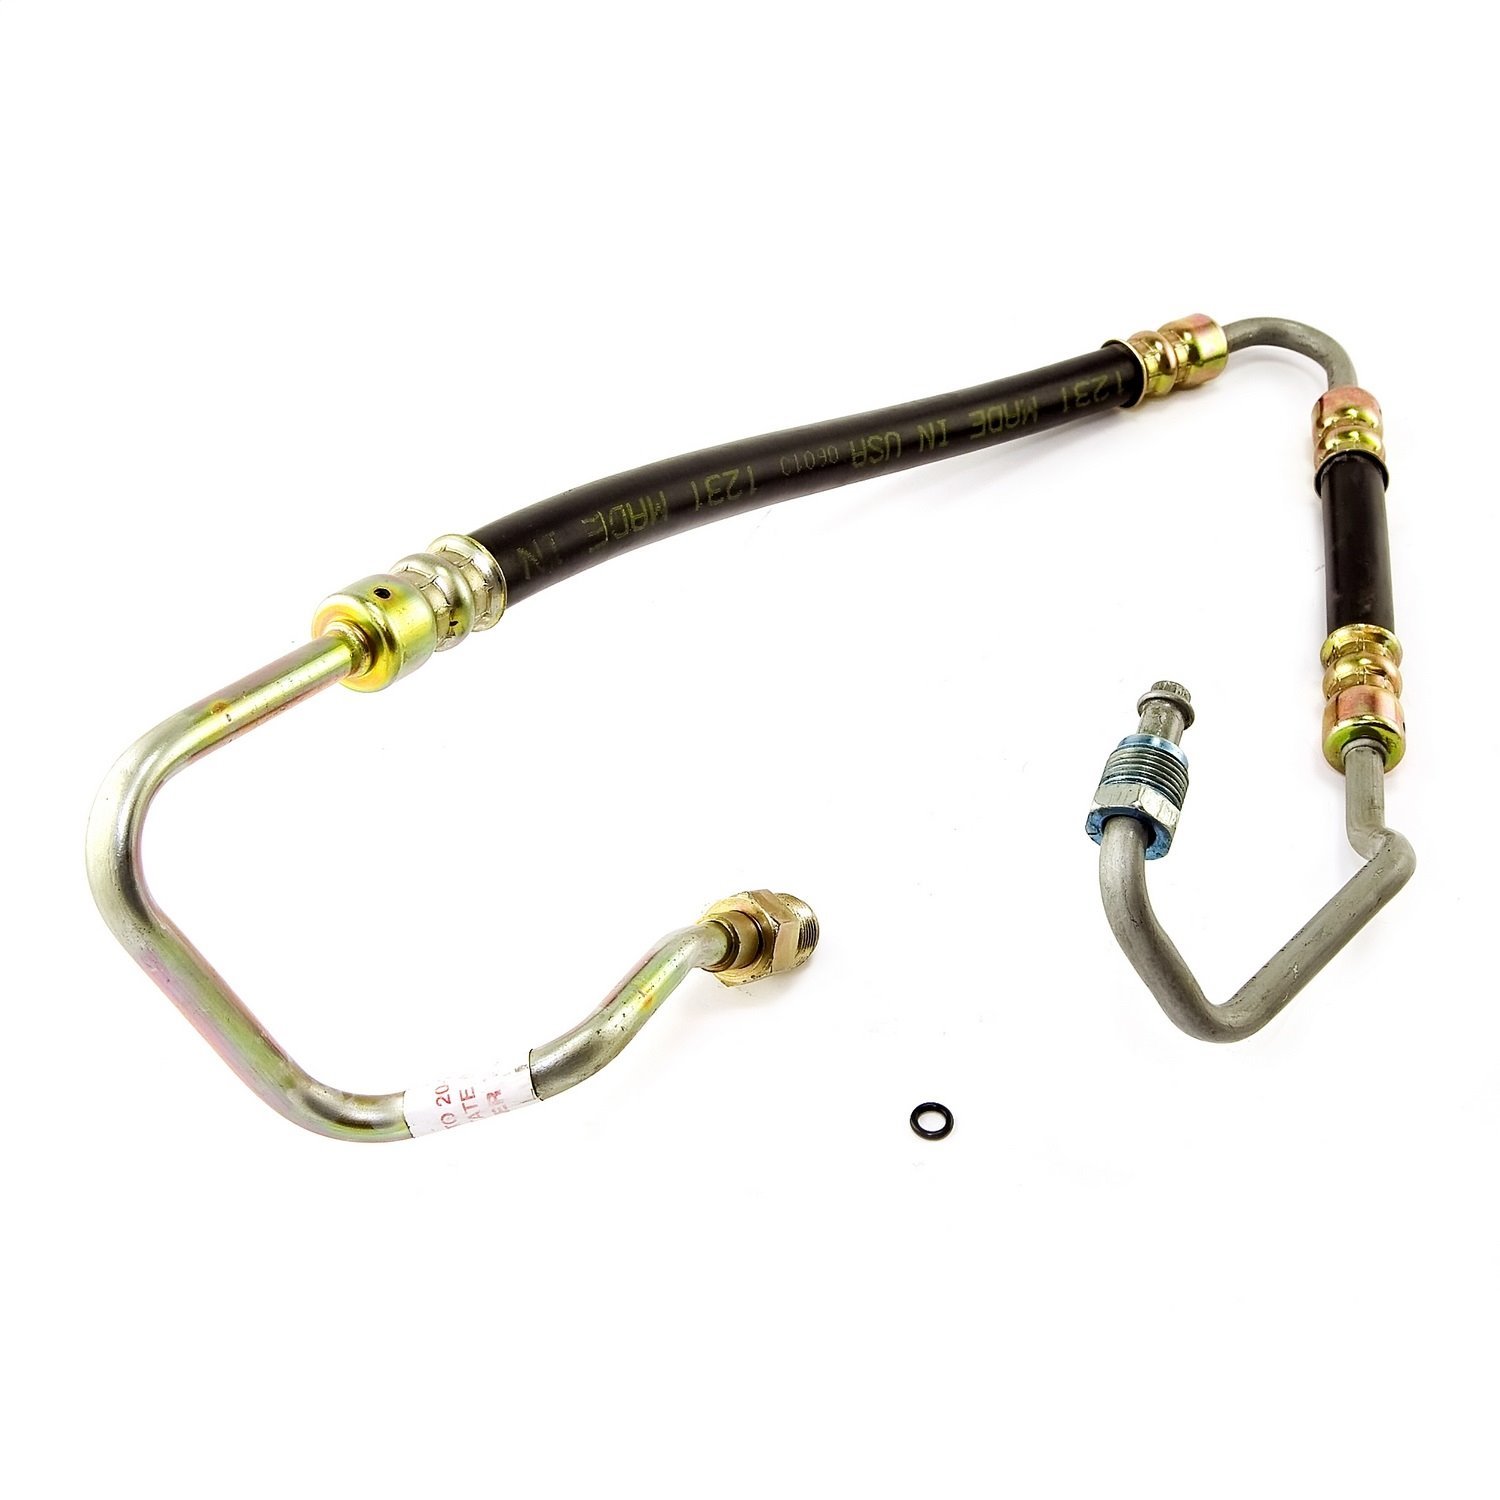 Replacement power steering pressure hose 99-00 Grand Cherokees 4.7L.hose connects pow